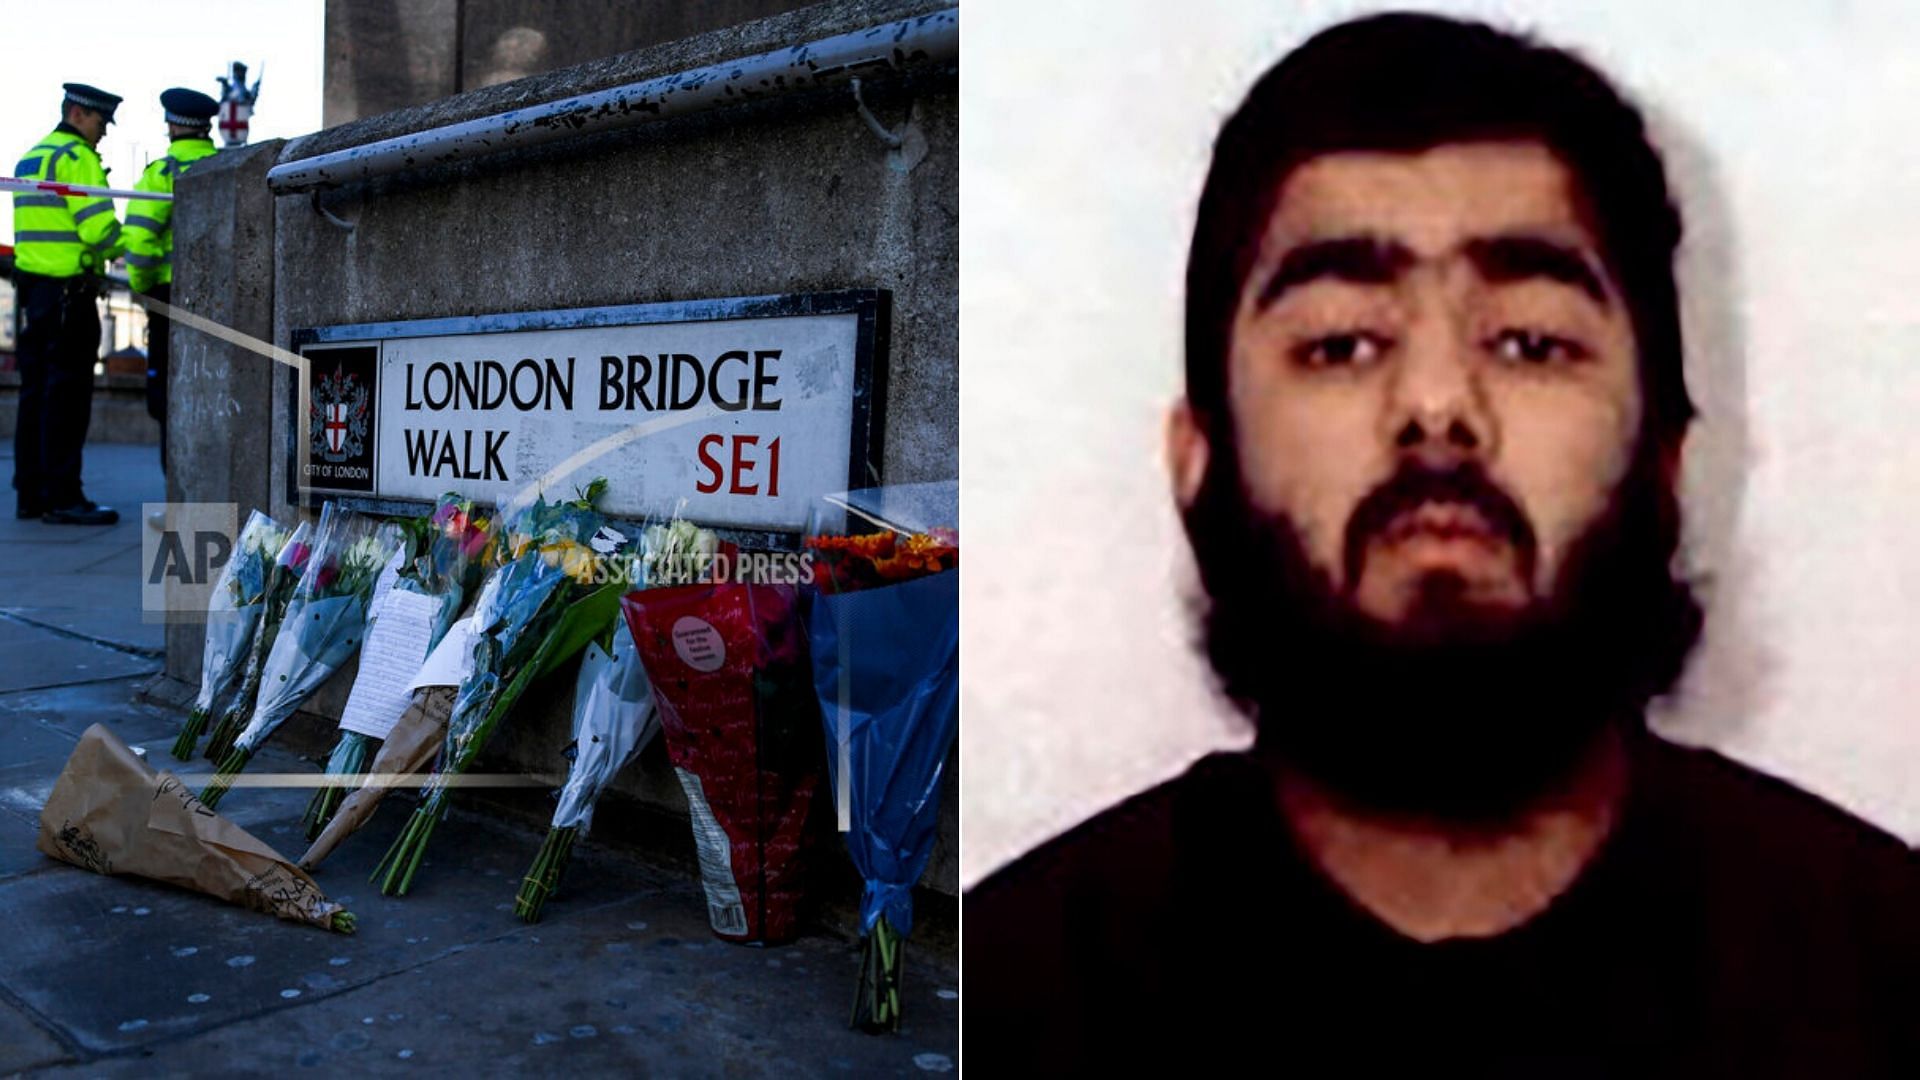 The group claimed the responsibility for Usman Khan’s rampage on the streets of London on Friday, which killed two people.